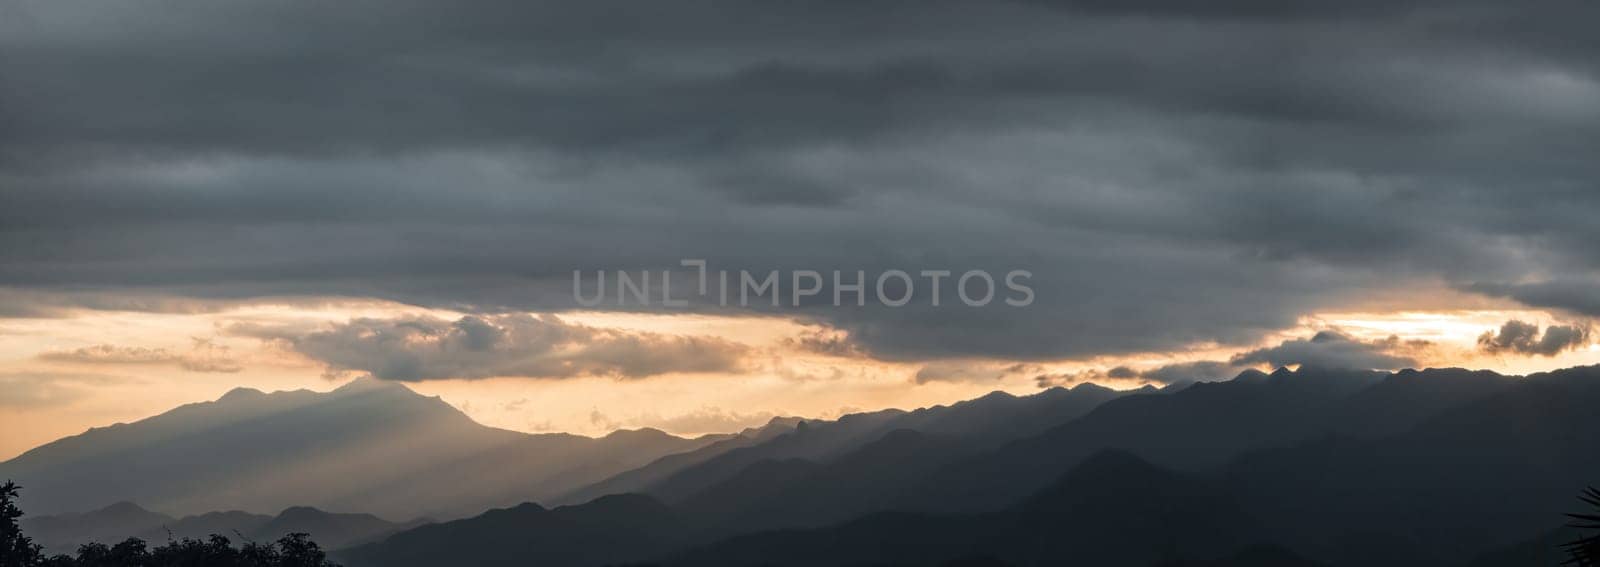 Majestic mountain range at sunset with sun rays and clouds by FerradalFCG